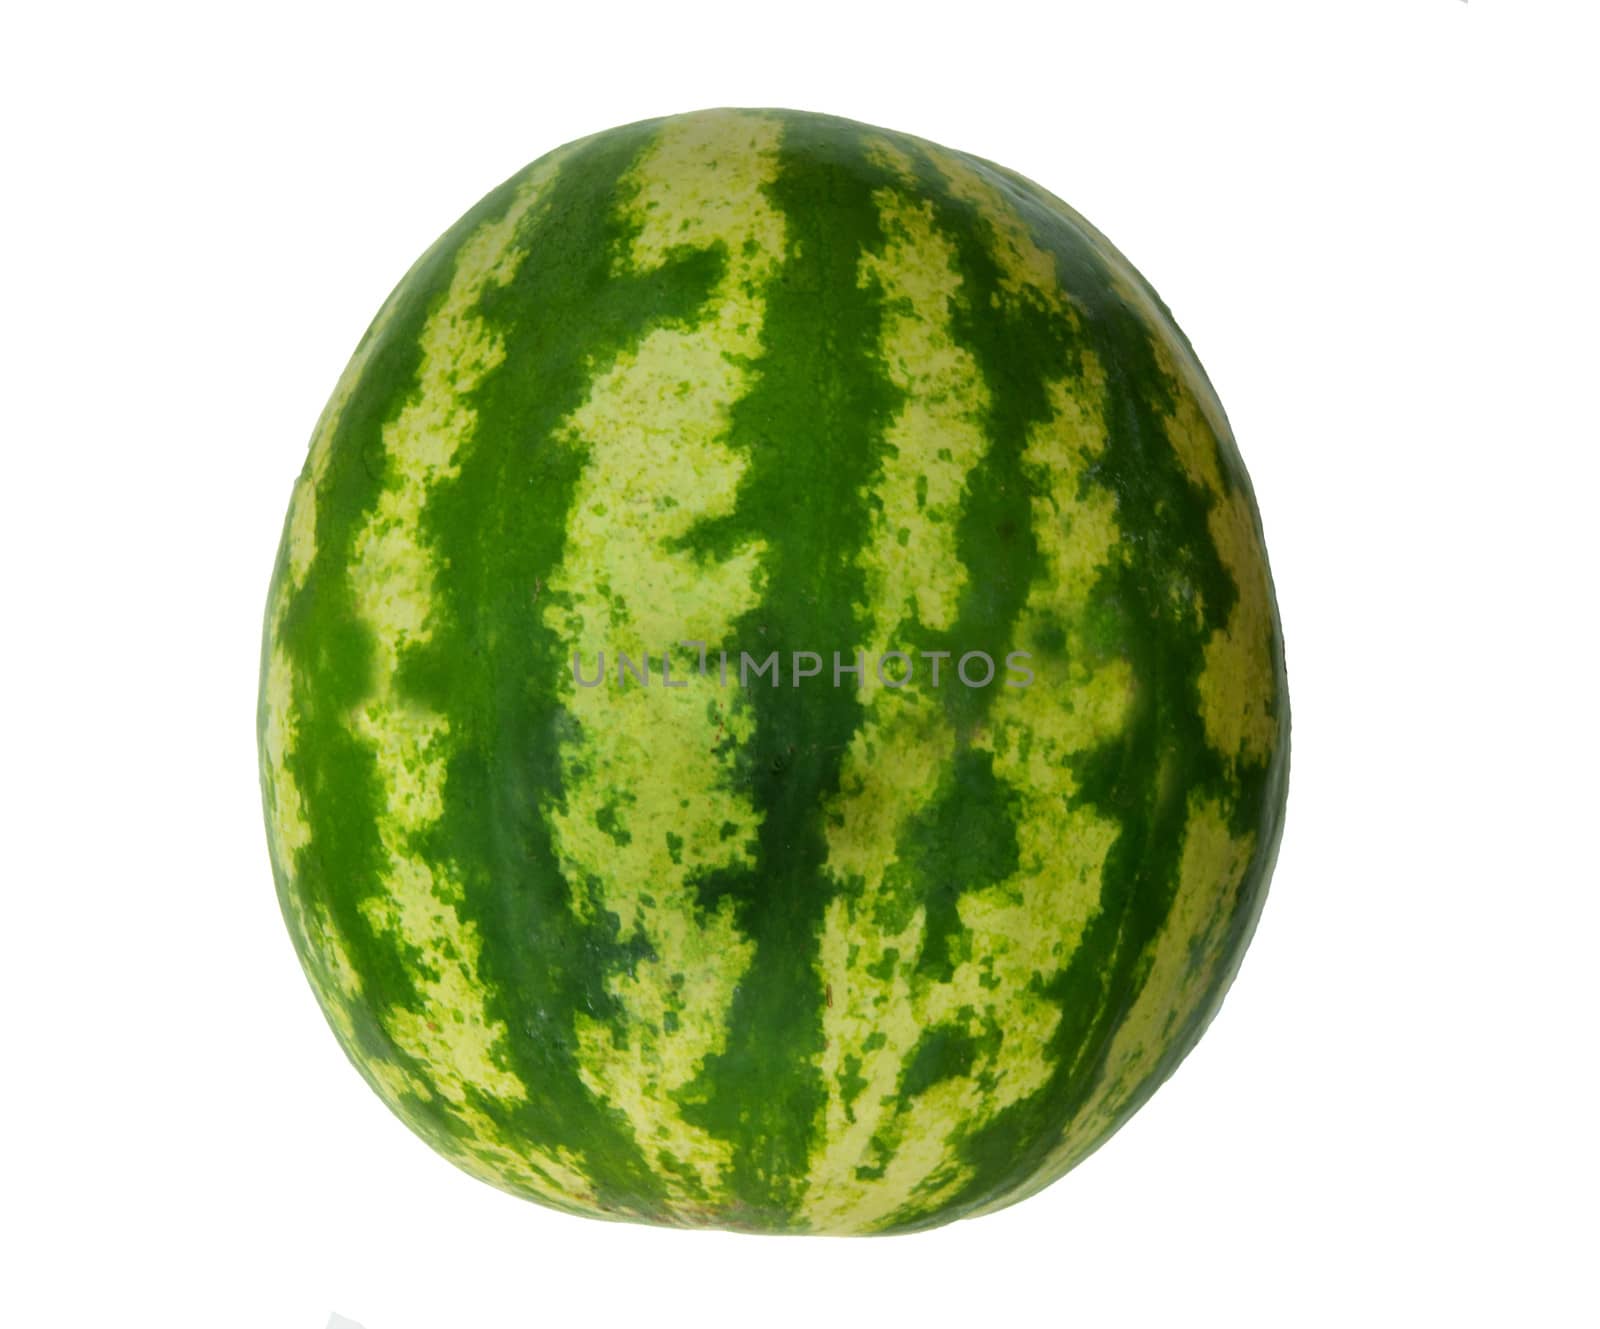 Watermelon on white background by cobol1964